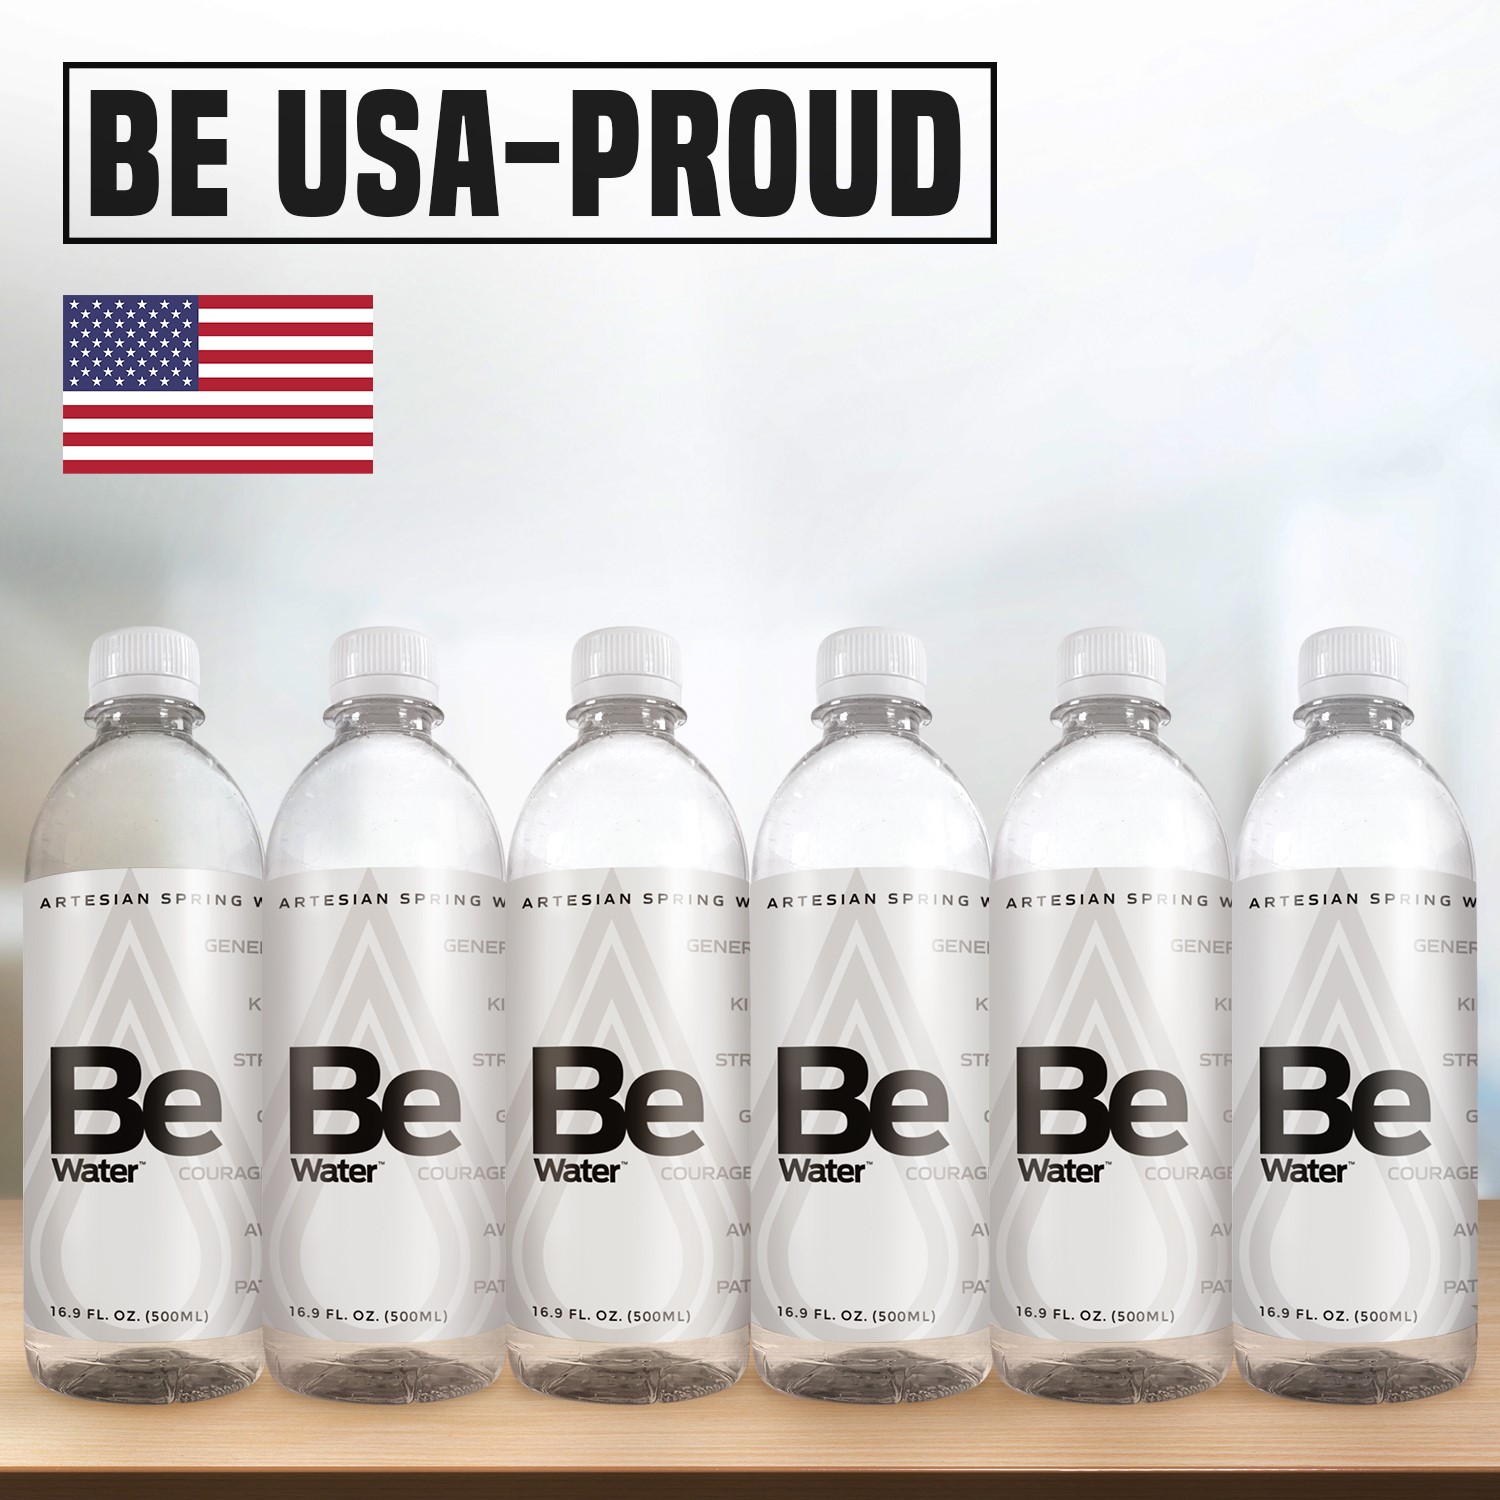 BE WATER - BE USA-PROUD